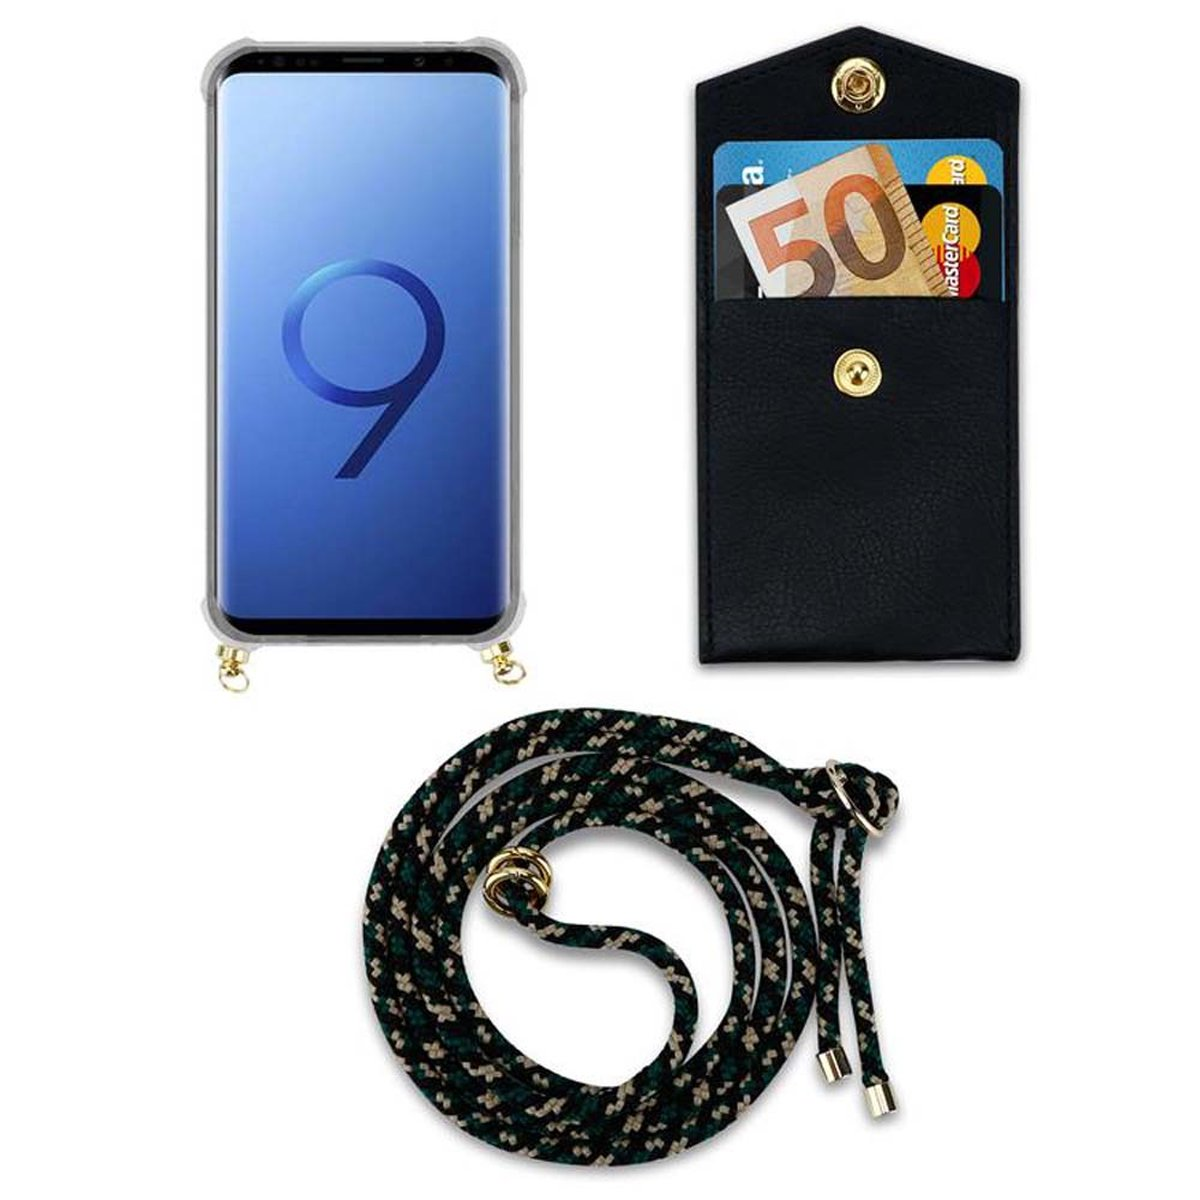 CADORABO Handy Kette mit abnehmbarer Kordel Samsung, Backcover, Gold Hülle, und CAMOUFLAGE Band Ringen, S9 PLUS, Galaxy